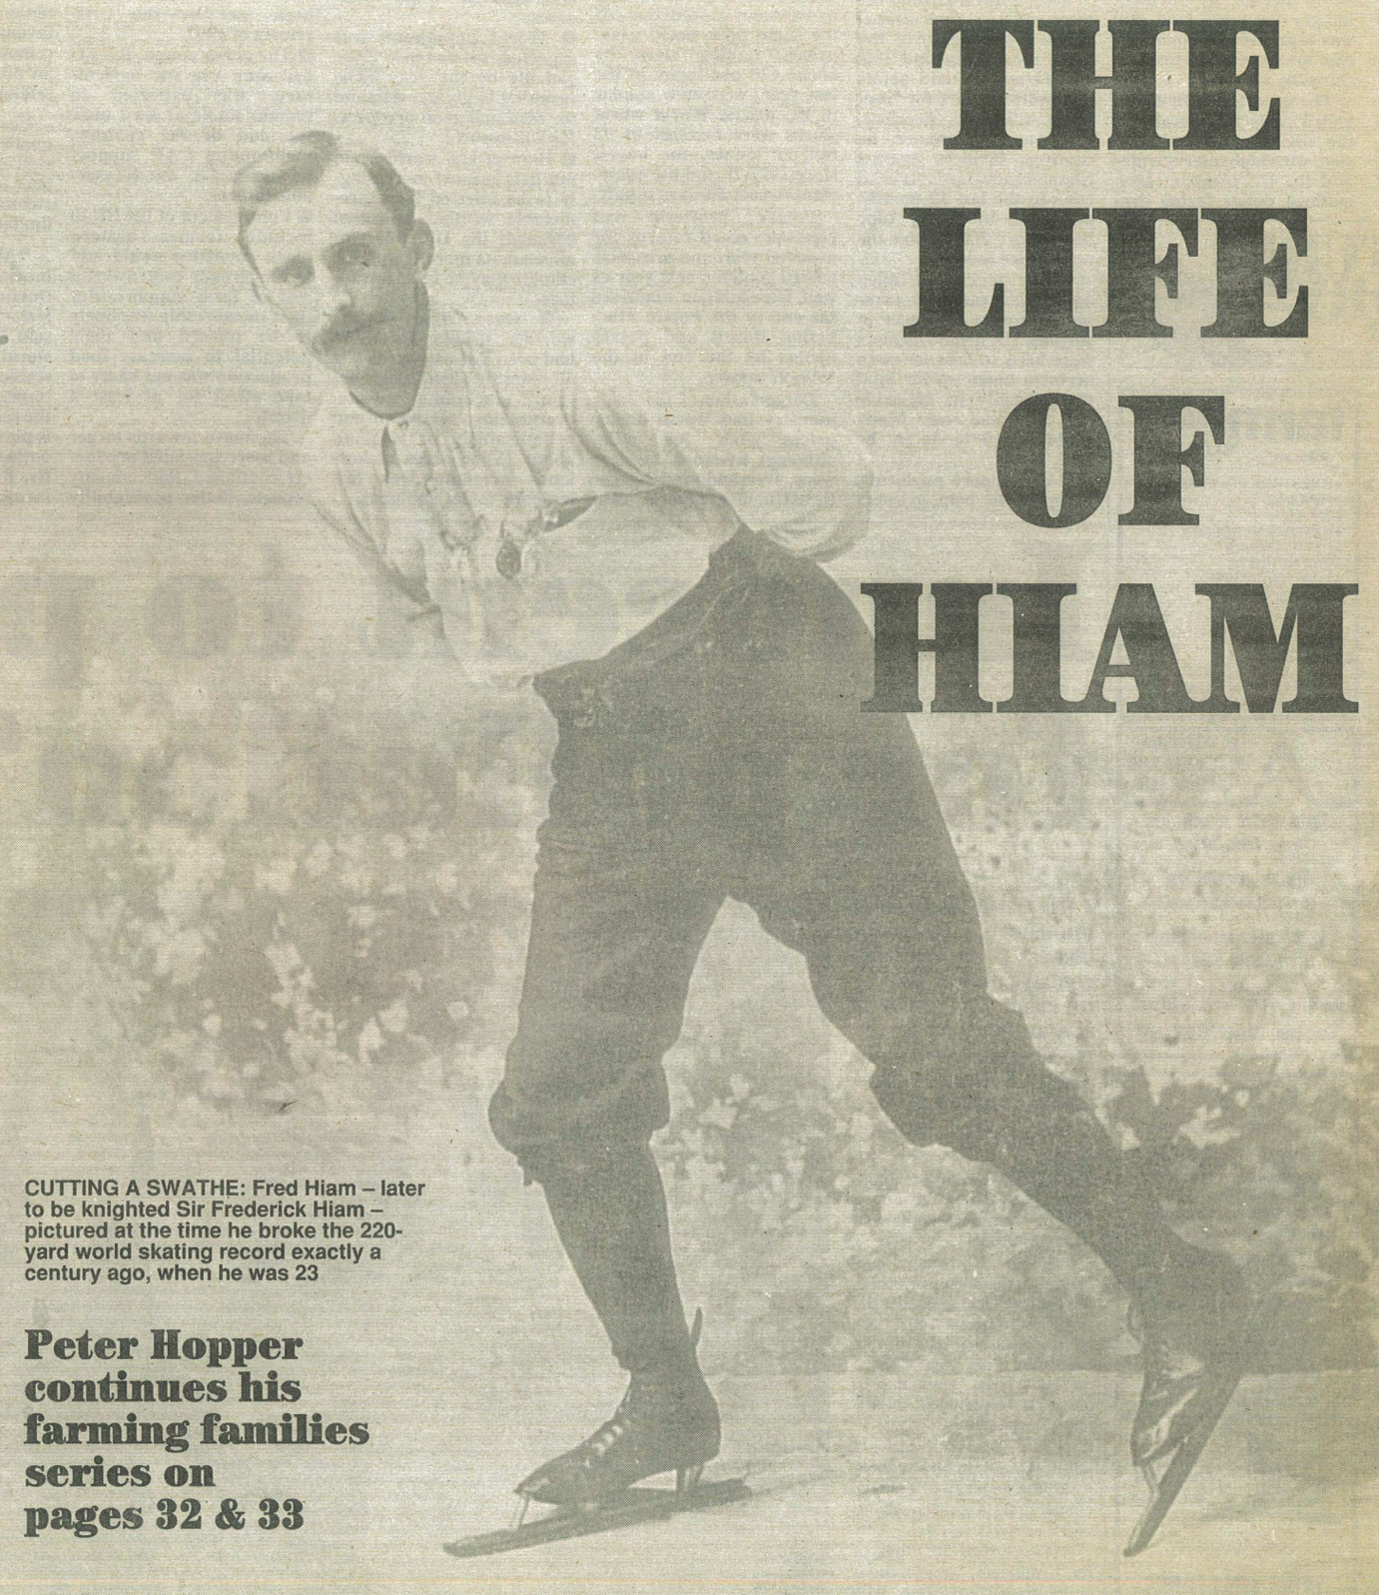 A newspaper article about the life of Frederick Hiam